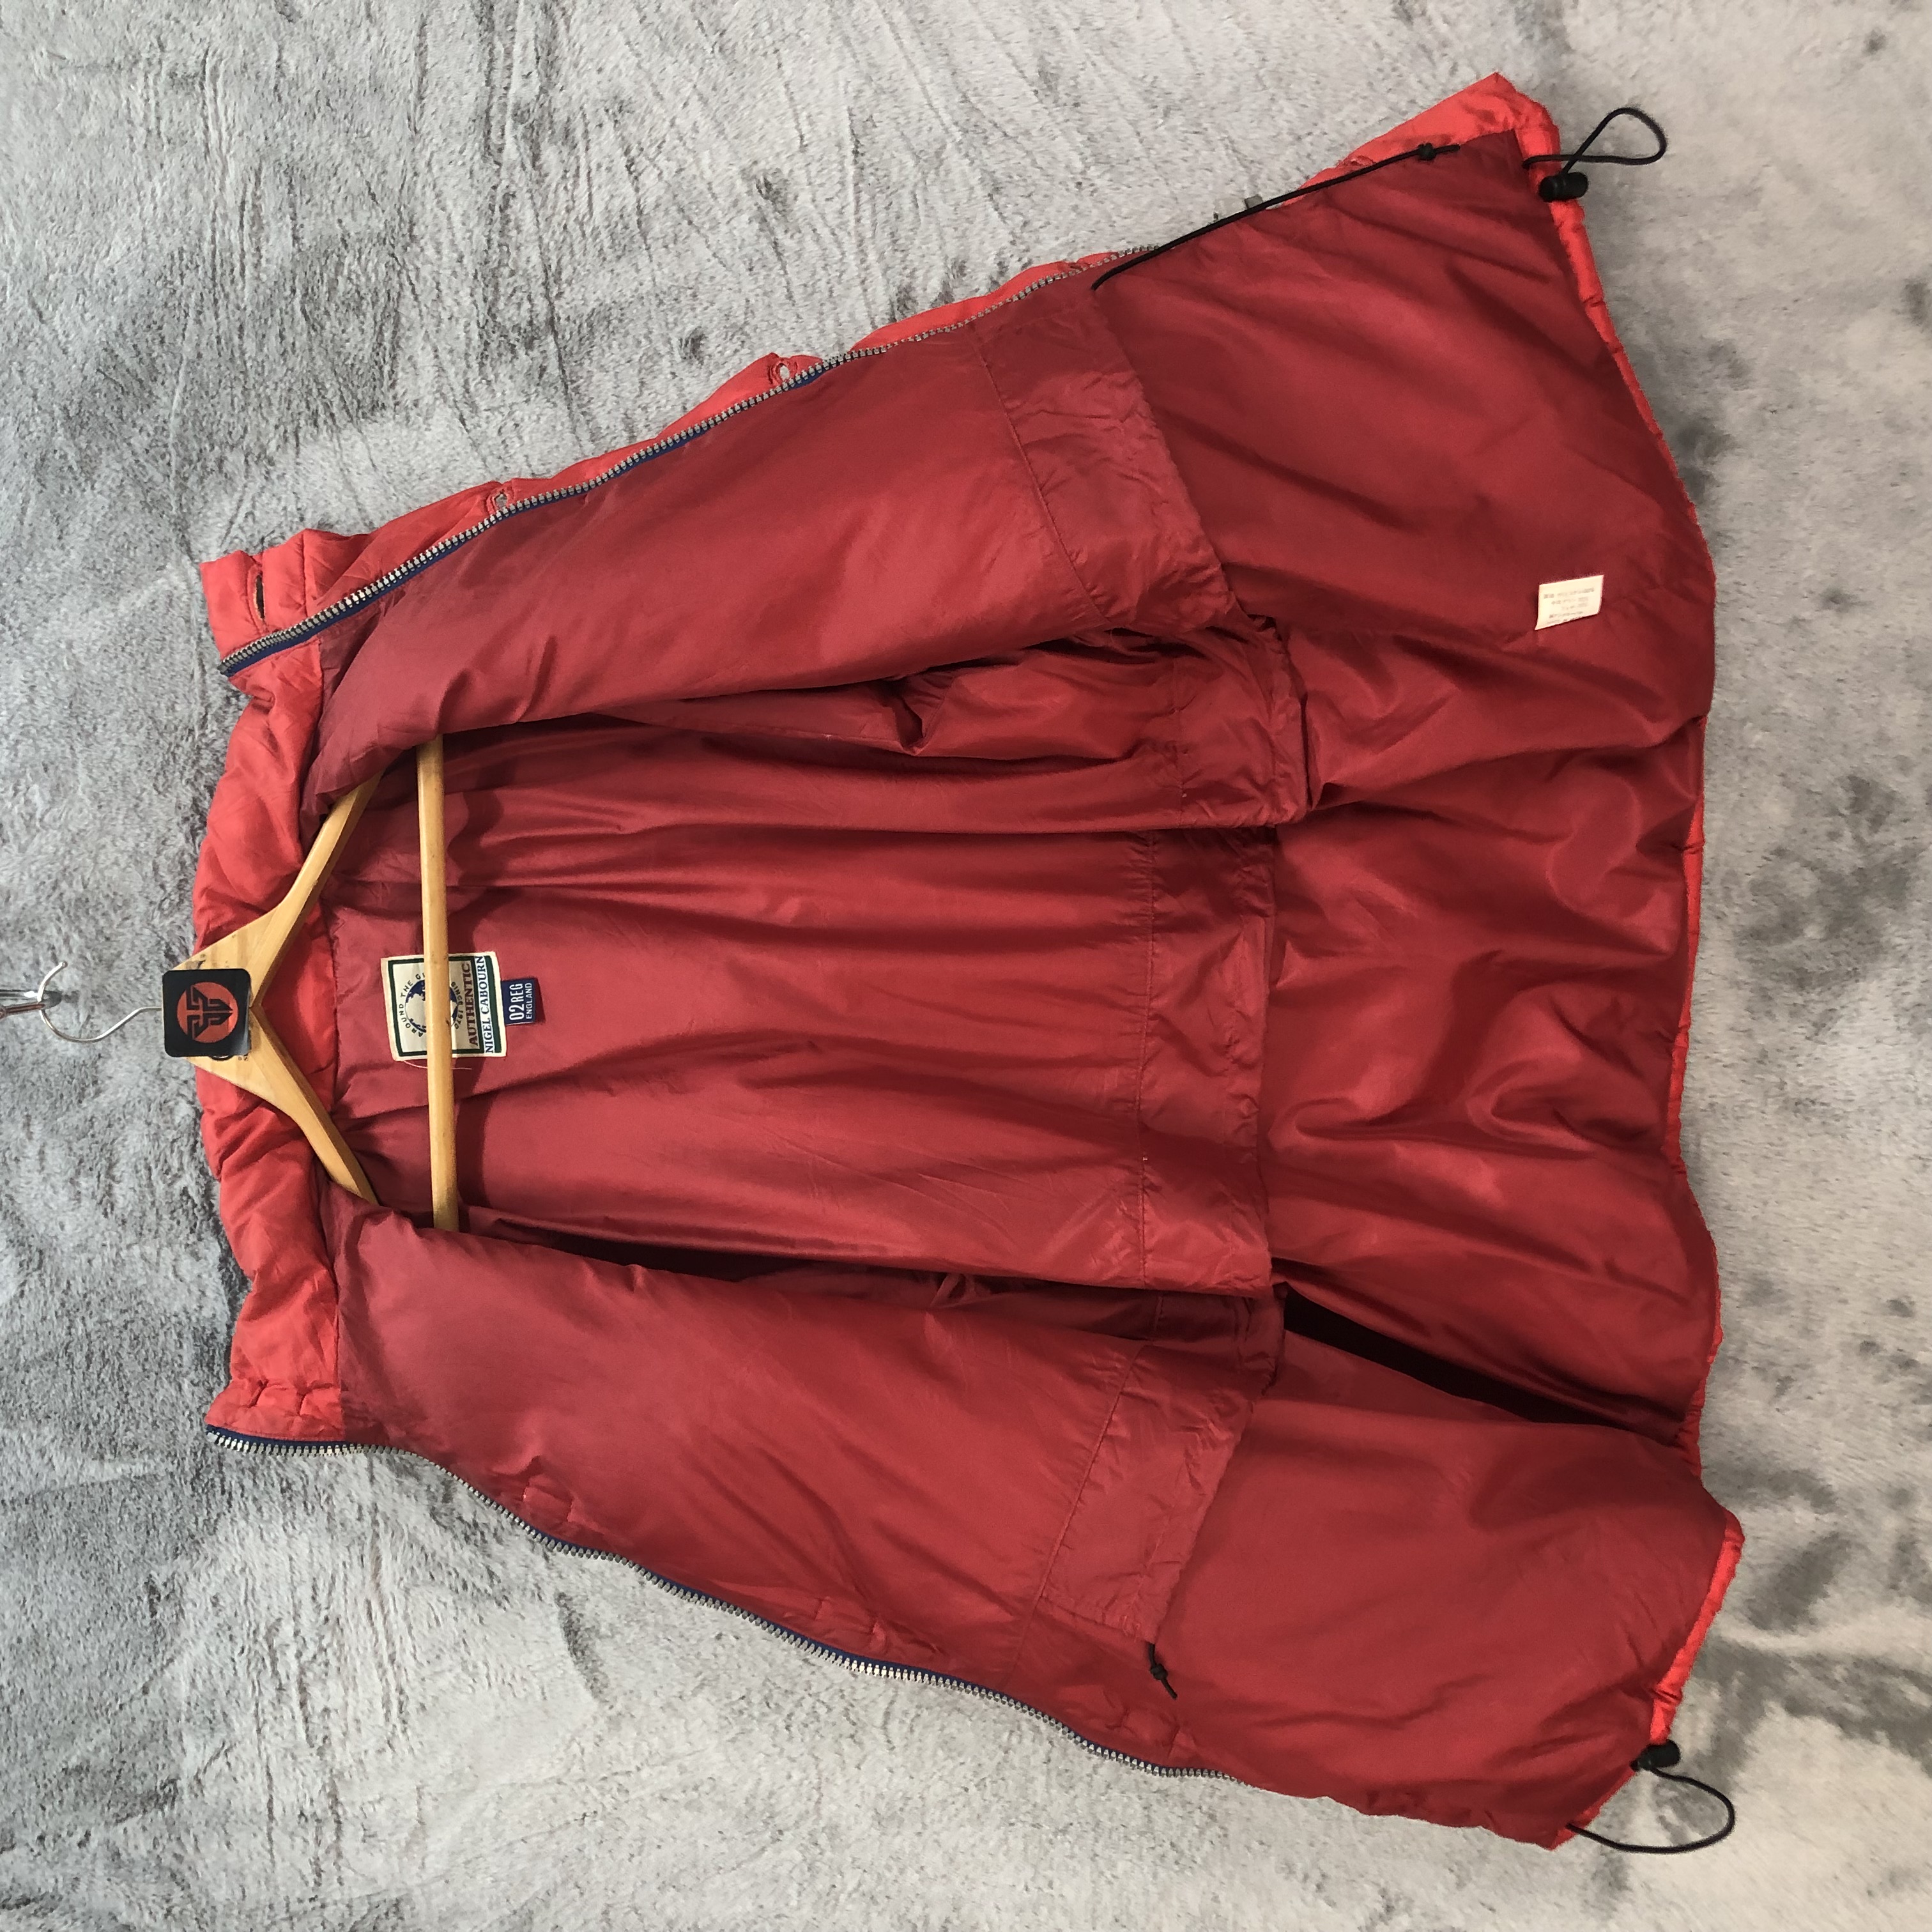 NIGEL CABOURN RED DOWN PUFFER JACKET #6553-73 - 12